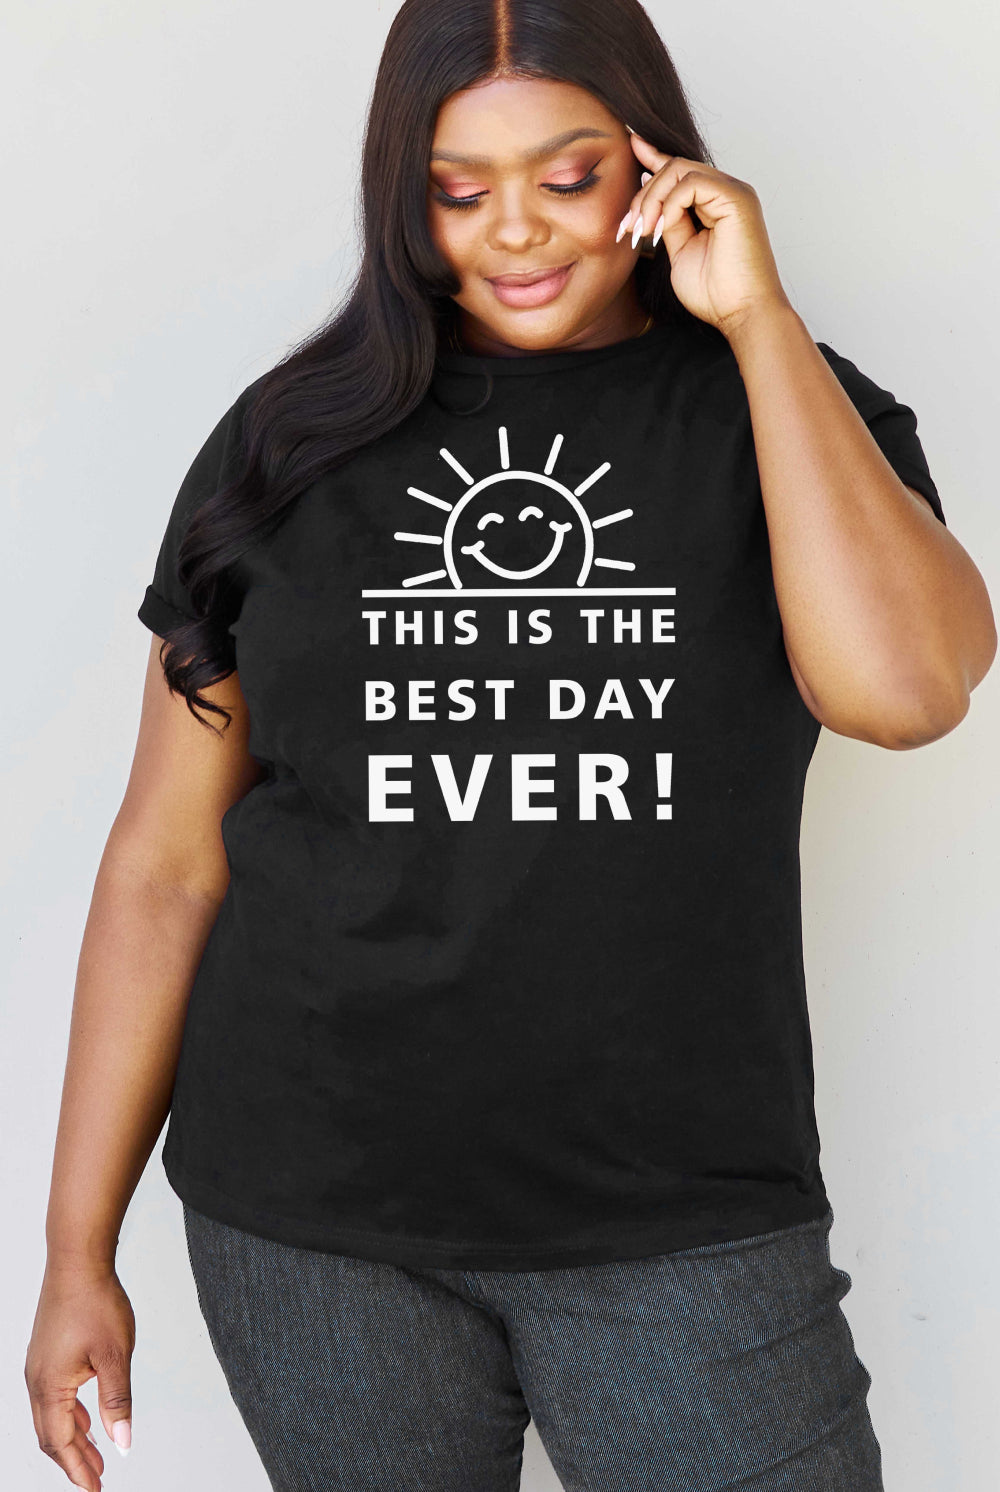 Black Simply Love Full Size THIS IS THE BEST DAY EVER! Graphic Cotton T-Shirt Graphic Tees